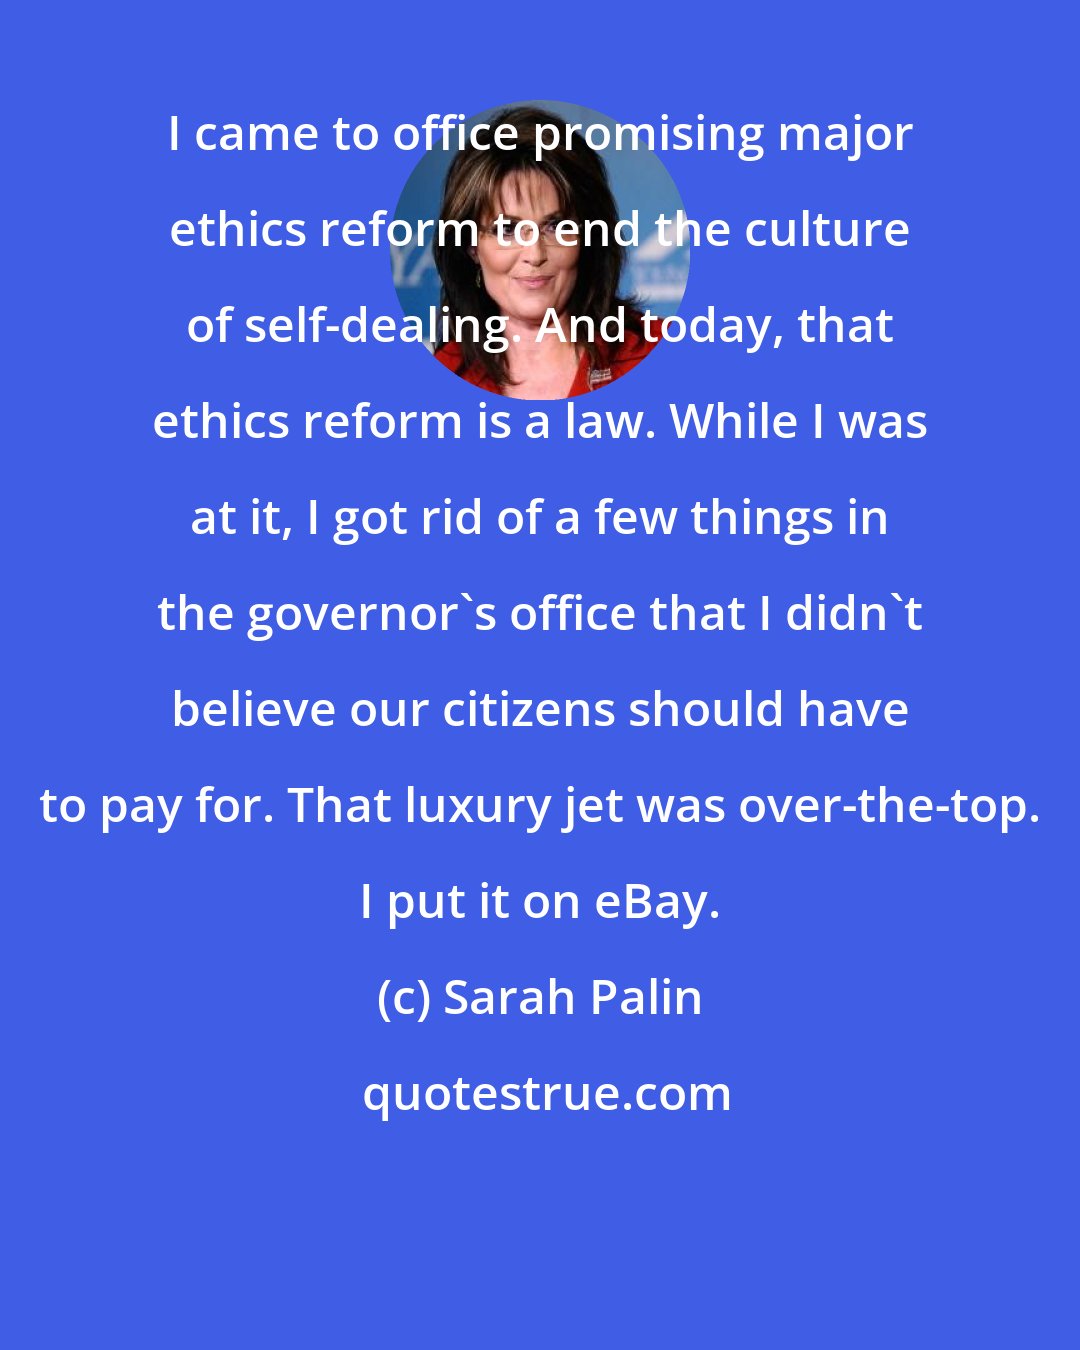 Sarah Palin: I came to office promising major ethics reform to end the culture of self-dealing. And today, that ethics reform is a law. While I was at it, I got rid of a few things in the governor's office that I didn't believe our citizens should have to pay for. That luxury jet was over-the-top. I put it on eBay.